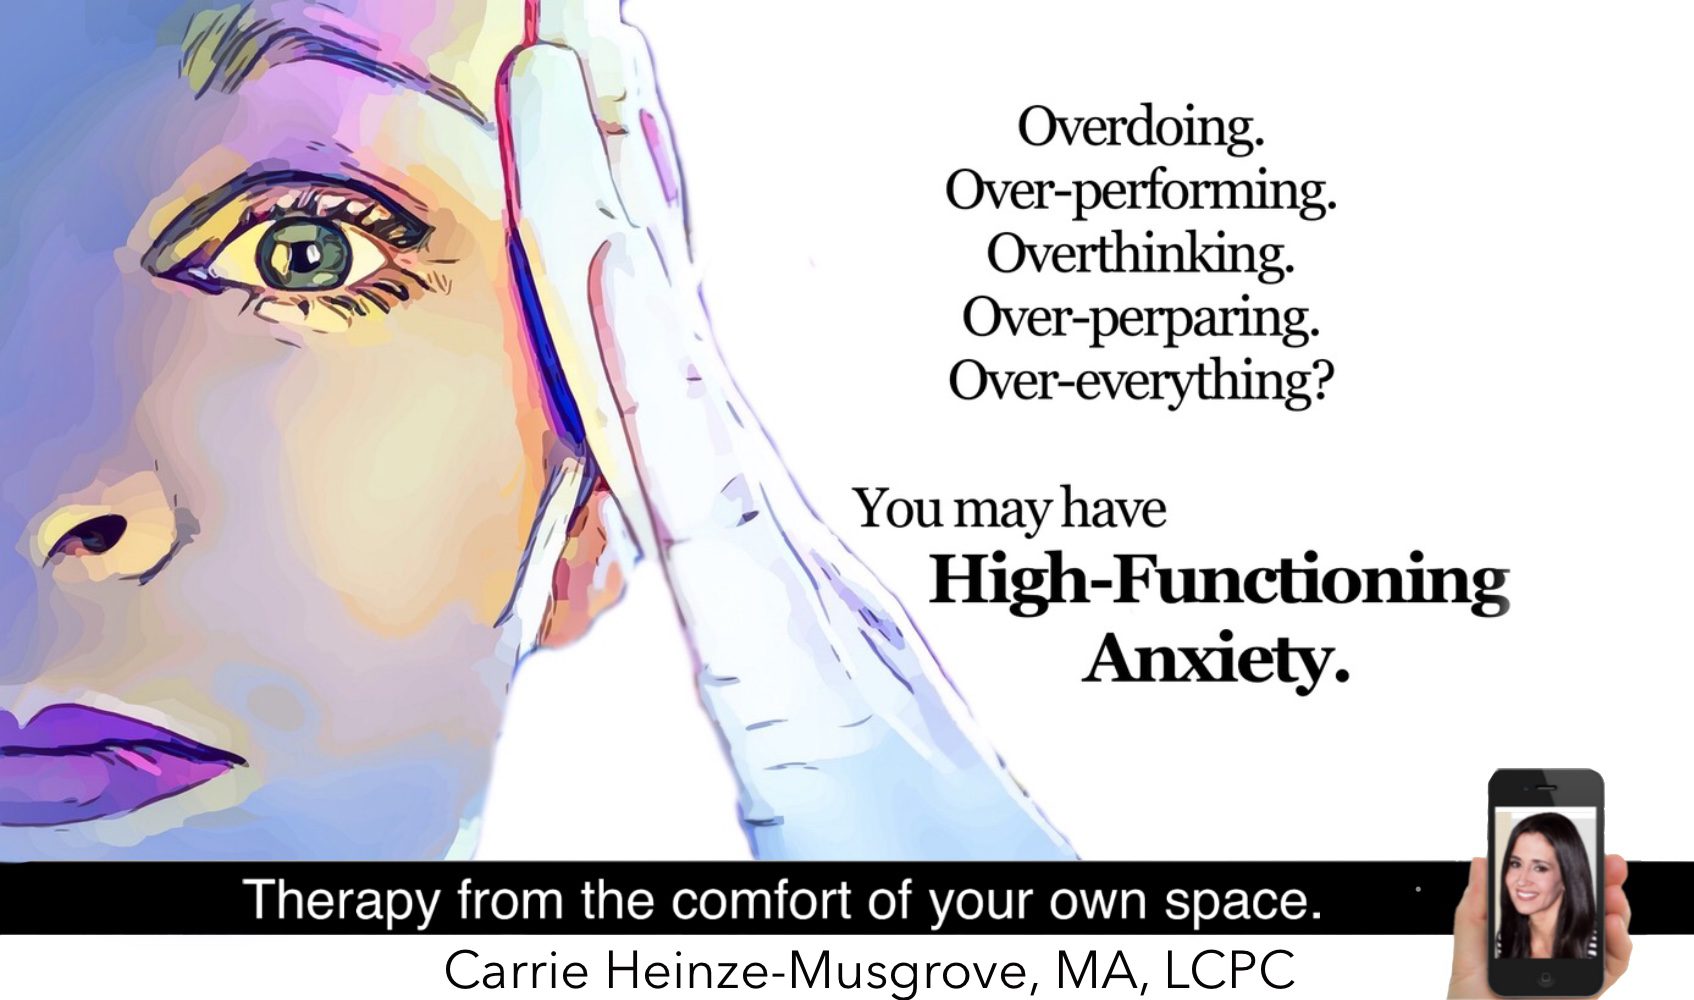 High-Functioning Anxiety